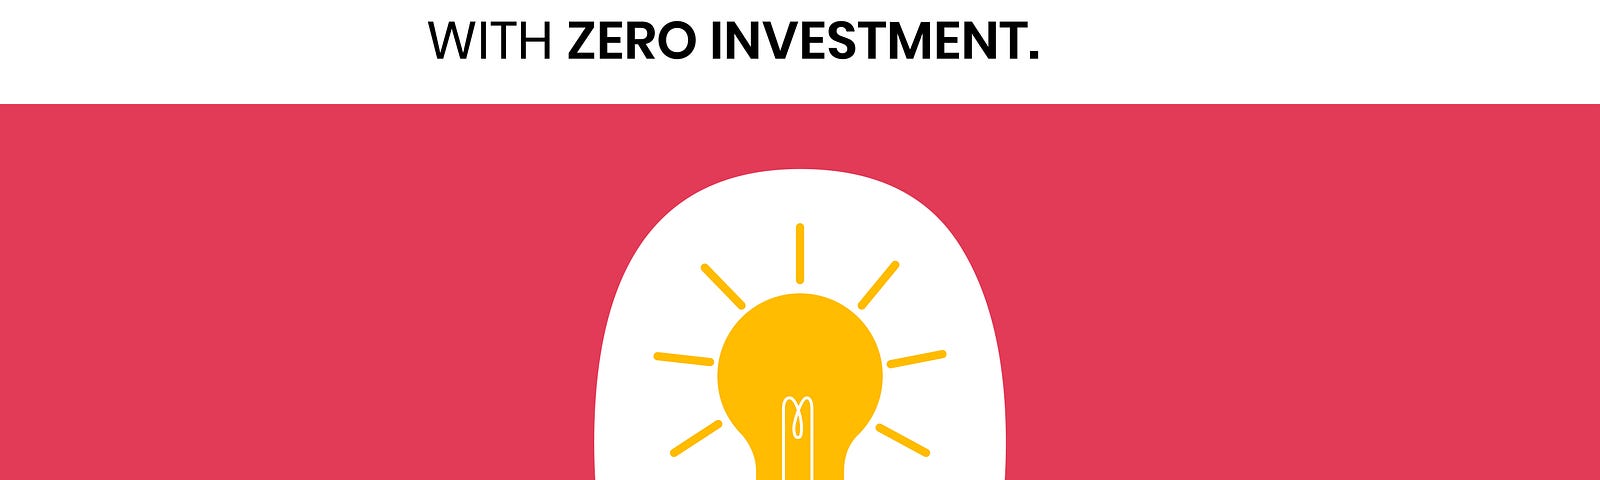 The Best Startup ideas with zero investment